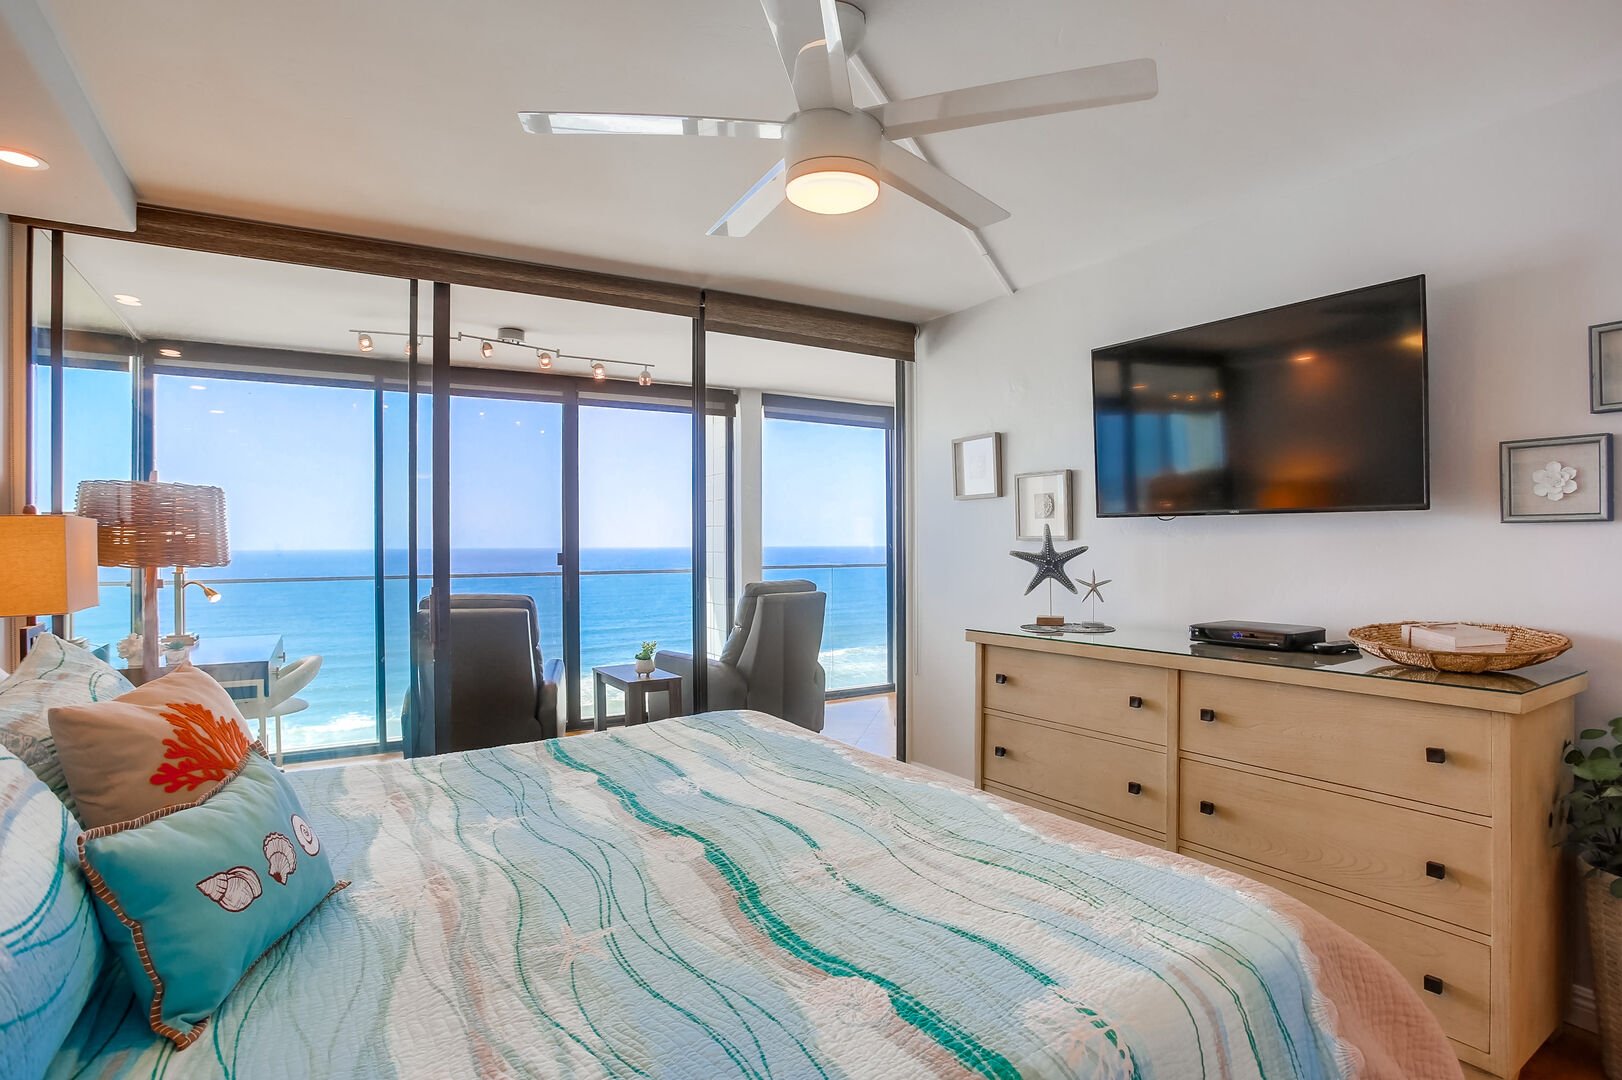 Master with king bed, ceiling fan, in-suite full bathroom, smart TV with dvr and Cable, closet and dresser storage, and incredible ocean views!